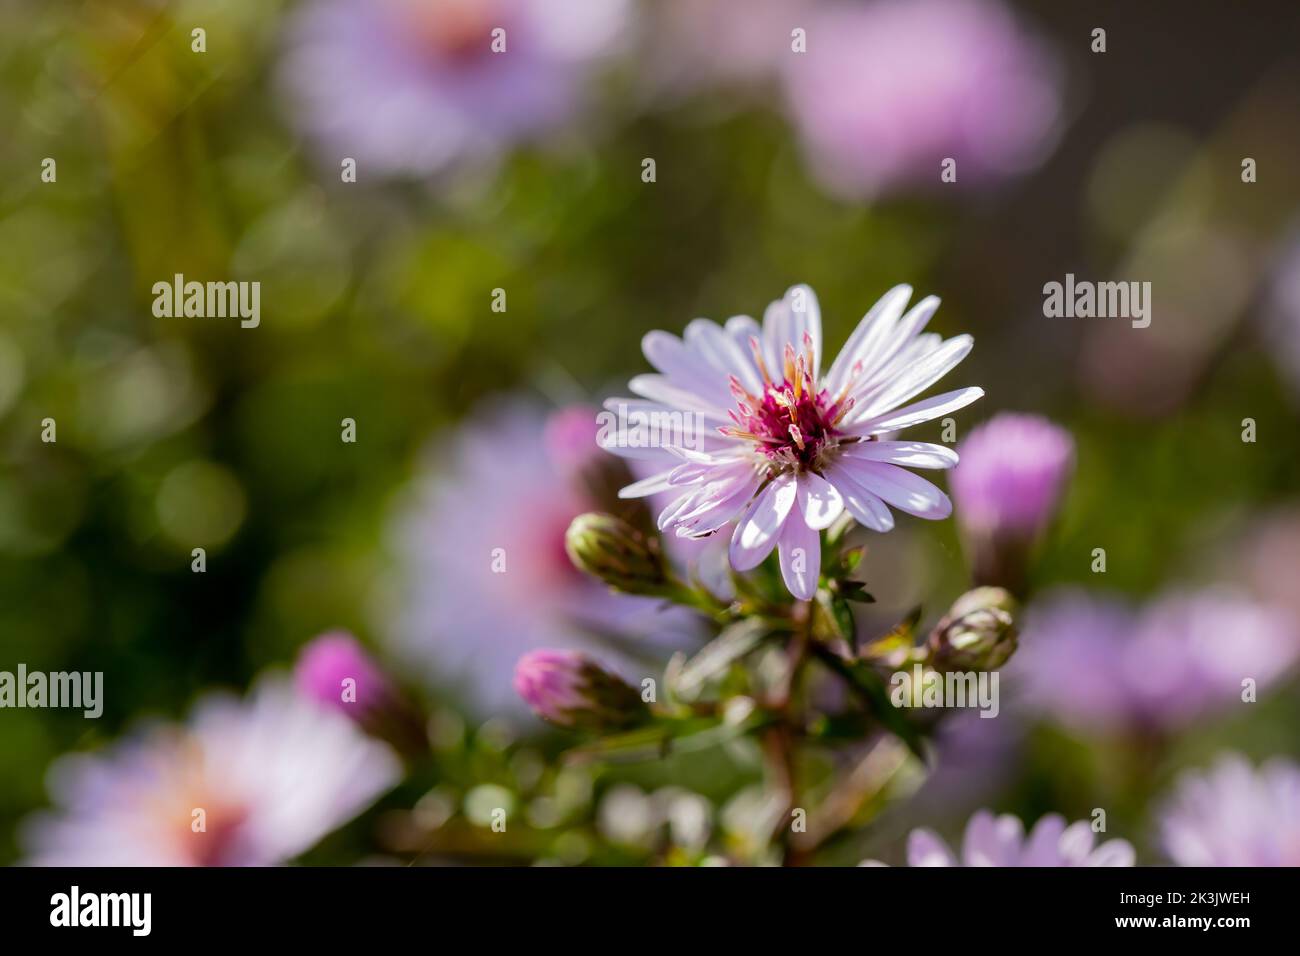 Small Aster flower closeup (Aster Small-Ness) Stock Photo